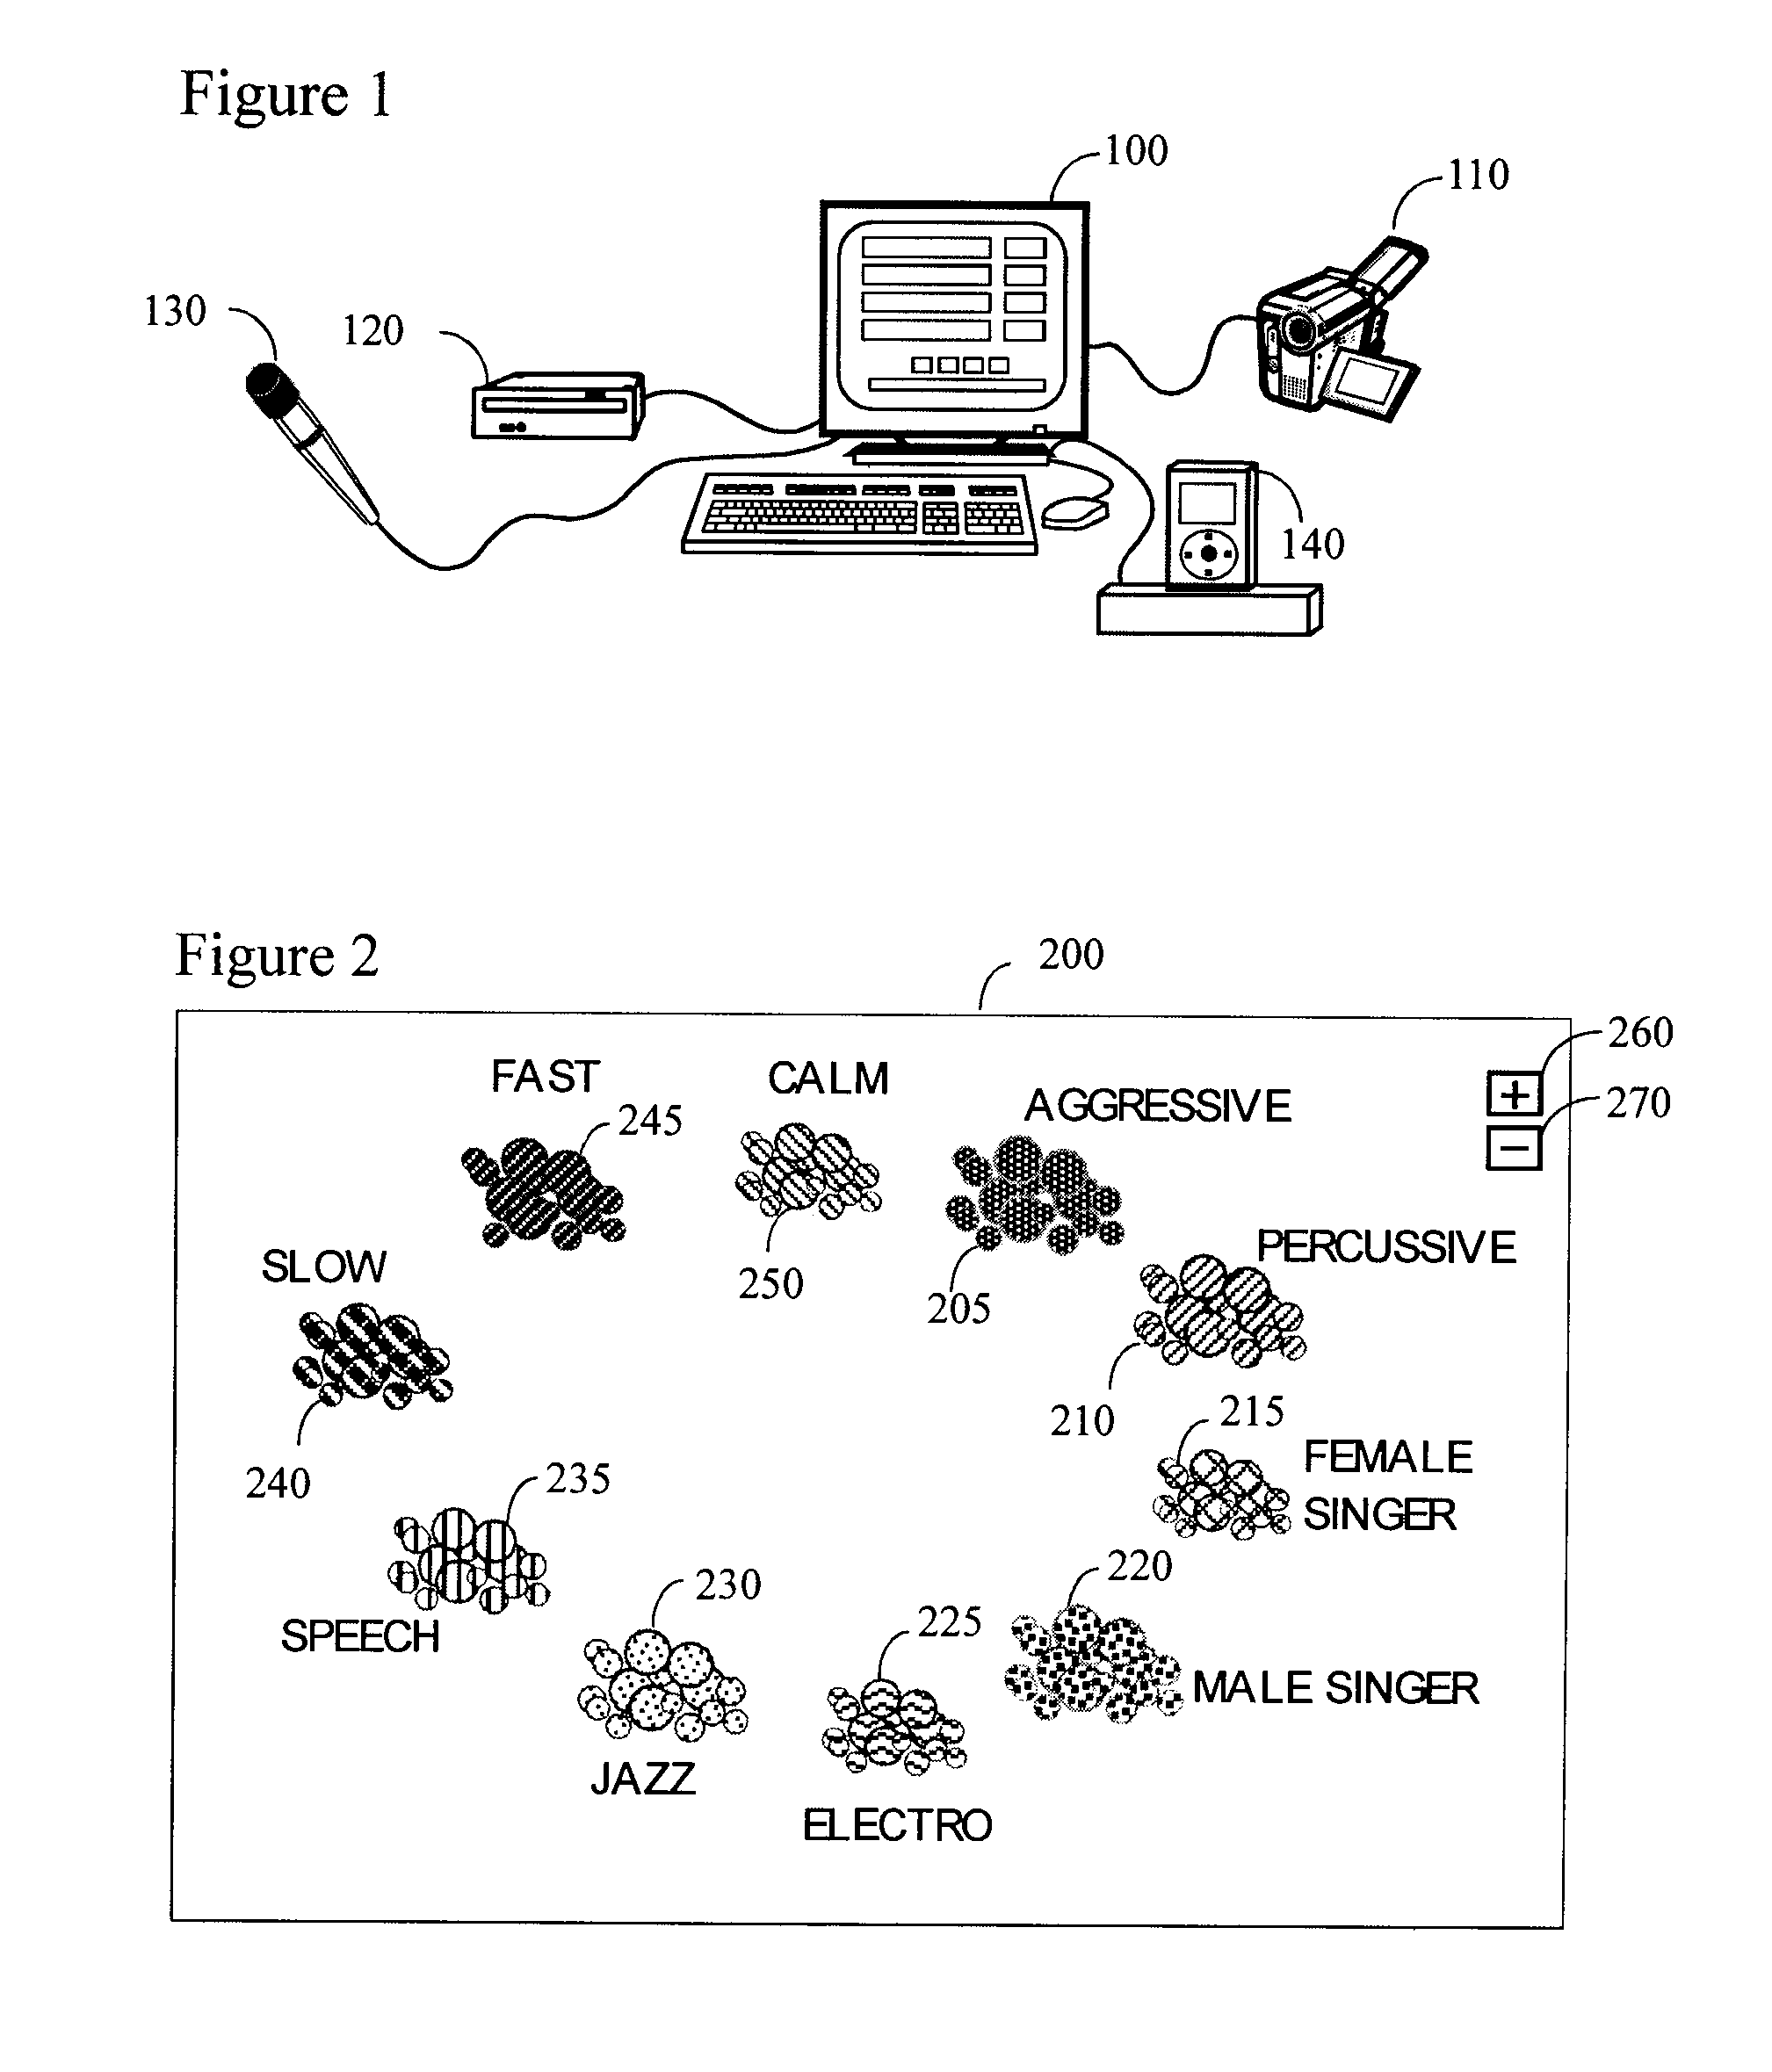 System and method for interactive visualization of music properties